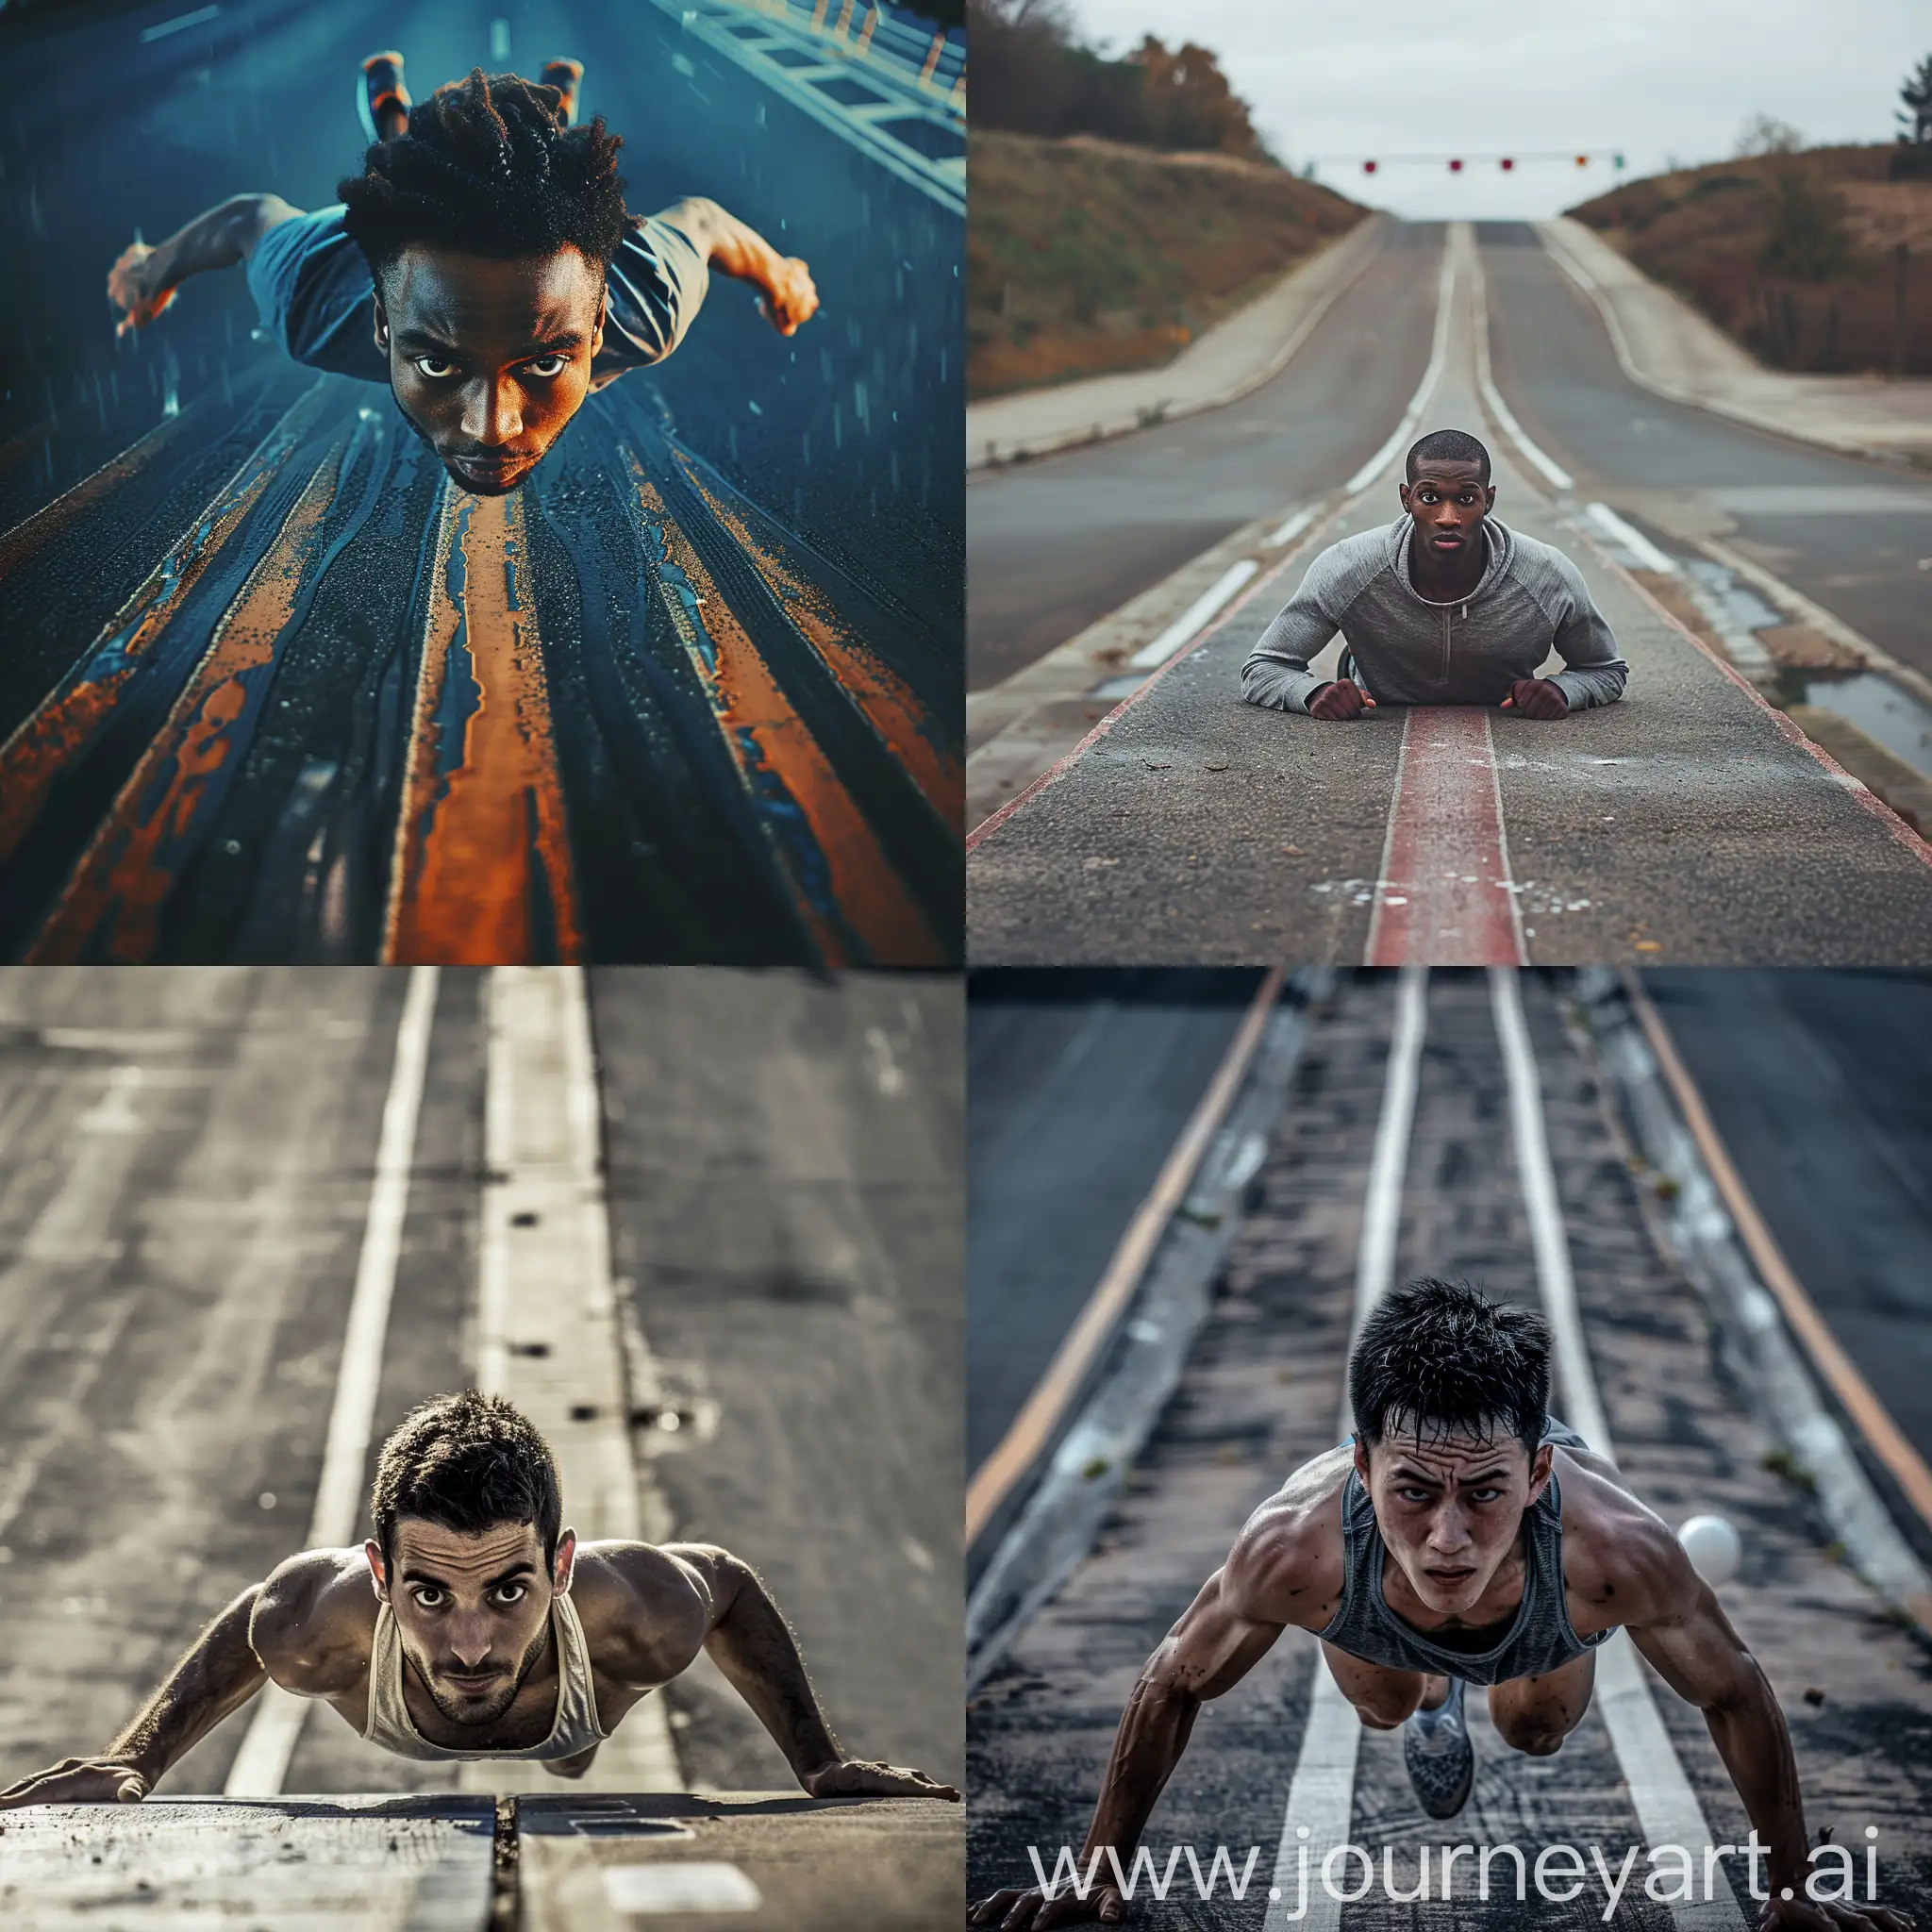 a runner losing race, his face on the center of the frame, he is looking at the front, realistic, real race, wide angle, road ramp, full body